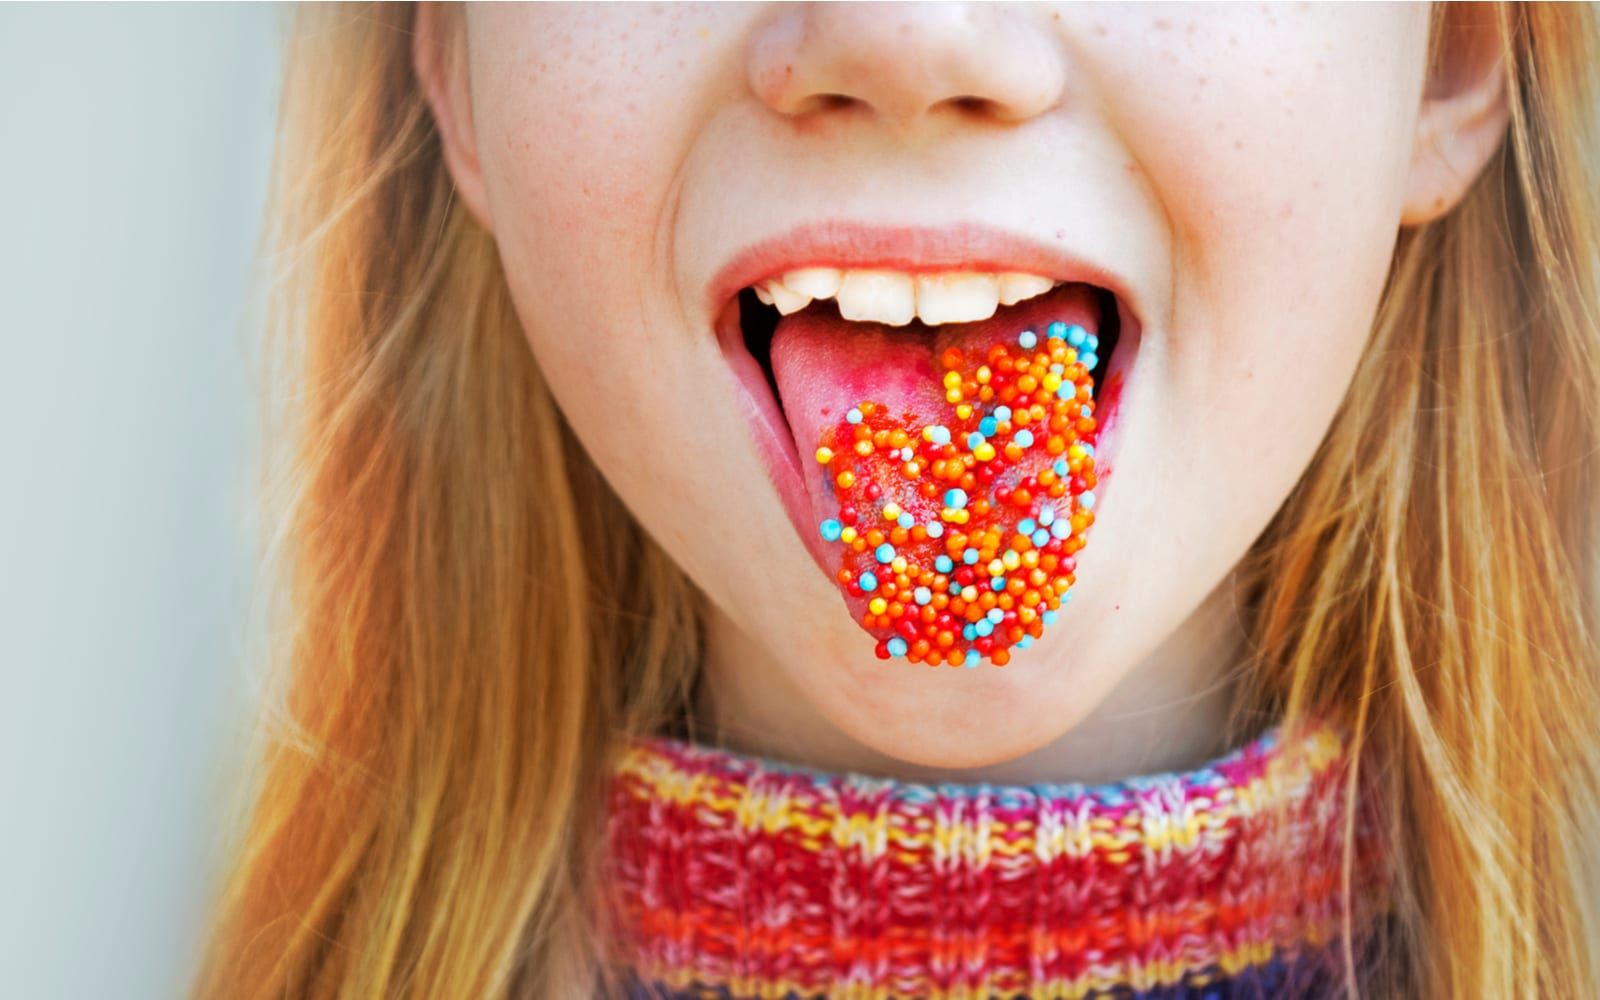 Child With Candy Covered Tongue